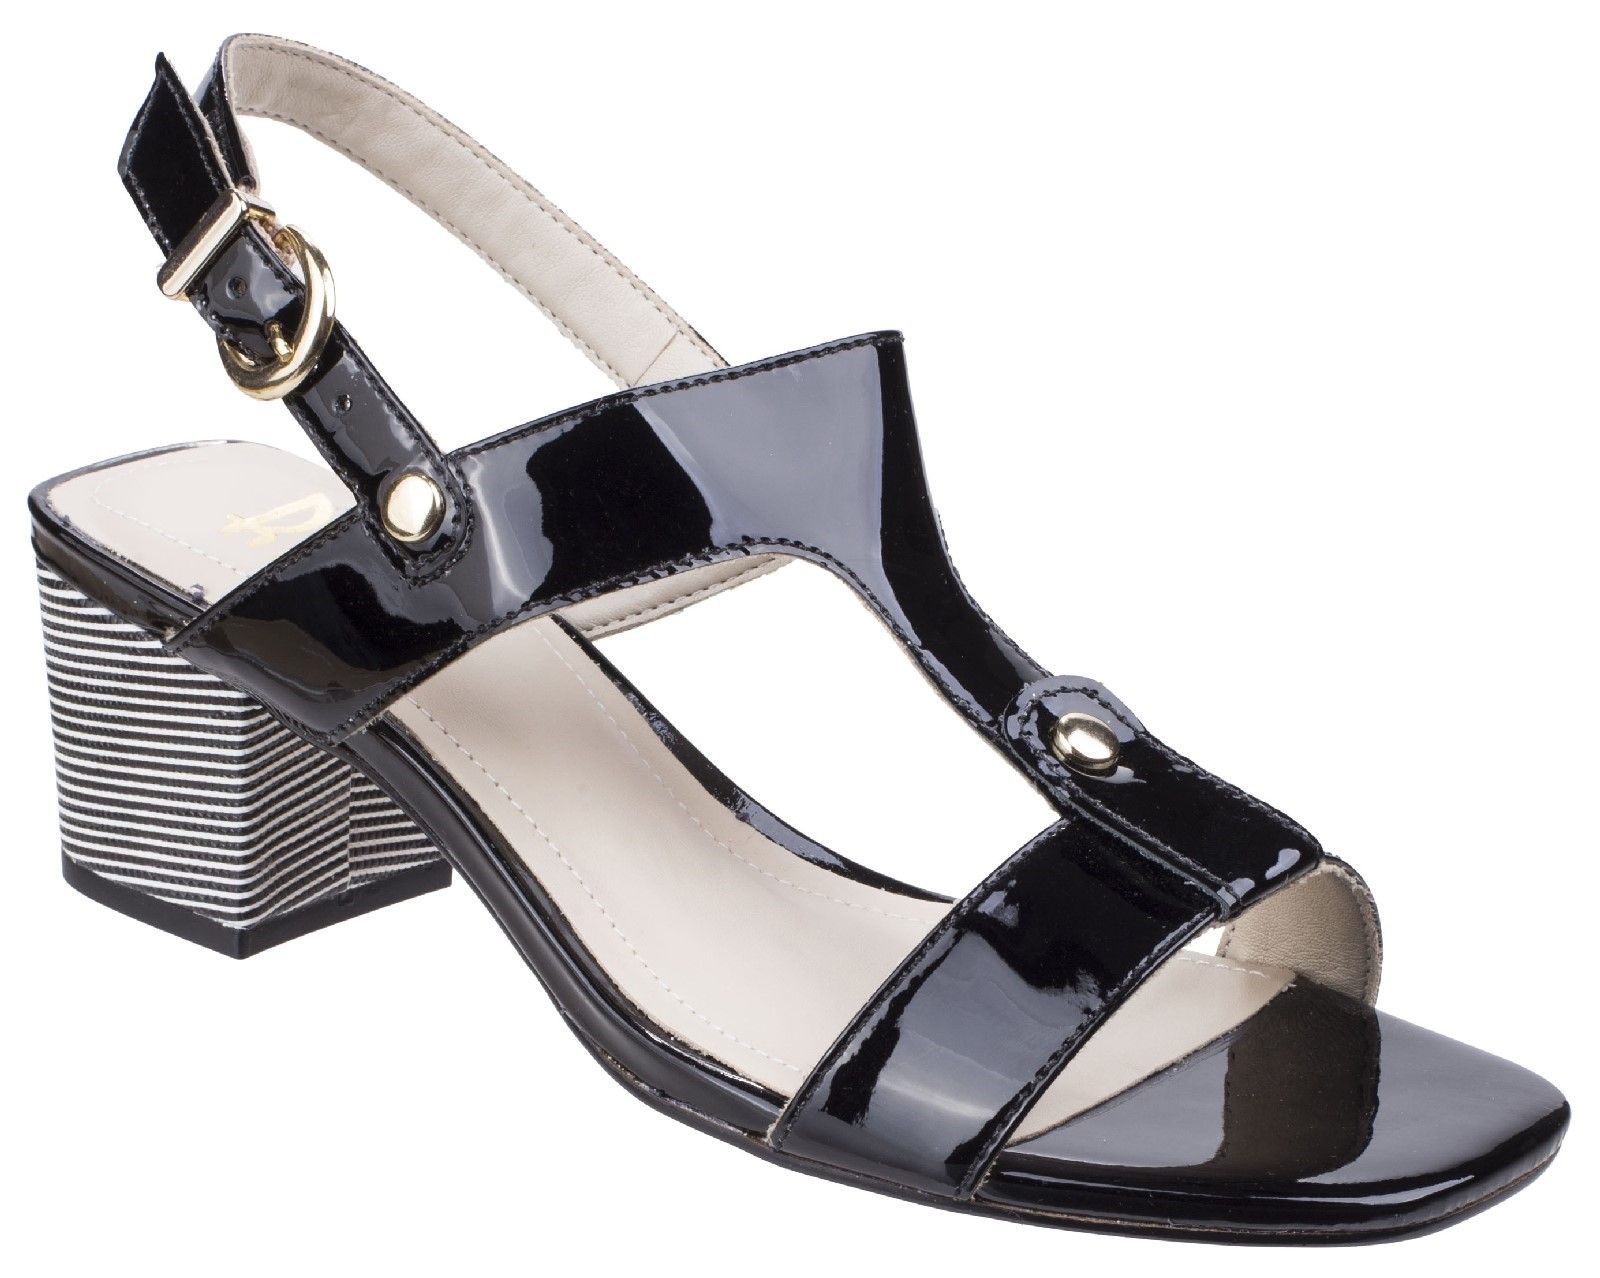 These Hot Heels from Riva are sizzling. An eye-catching striking block heel showcases minimalistic polished uppers with classy stud embellishments that give barefoot wear a certain desired attitude. Luxury design using glossy patent leather uppers. 
Open toe T-Bar mule with sling back strap. 
Adjustable heel strap with buckle closure. 
Hidden elasticated comfort strap panel. 
Metallic studs on side and mid toe strap.